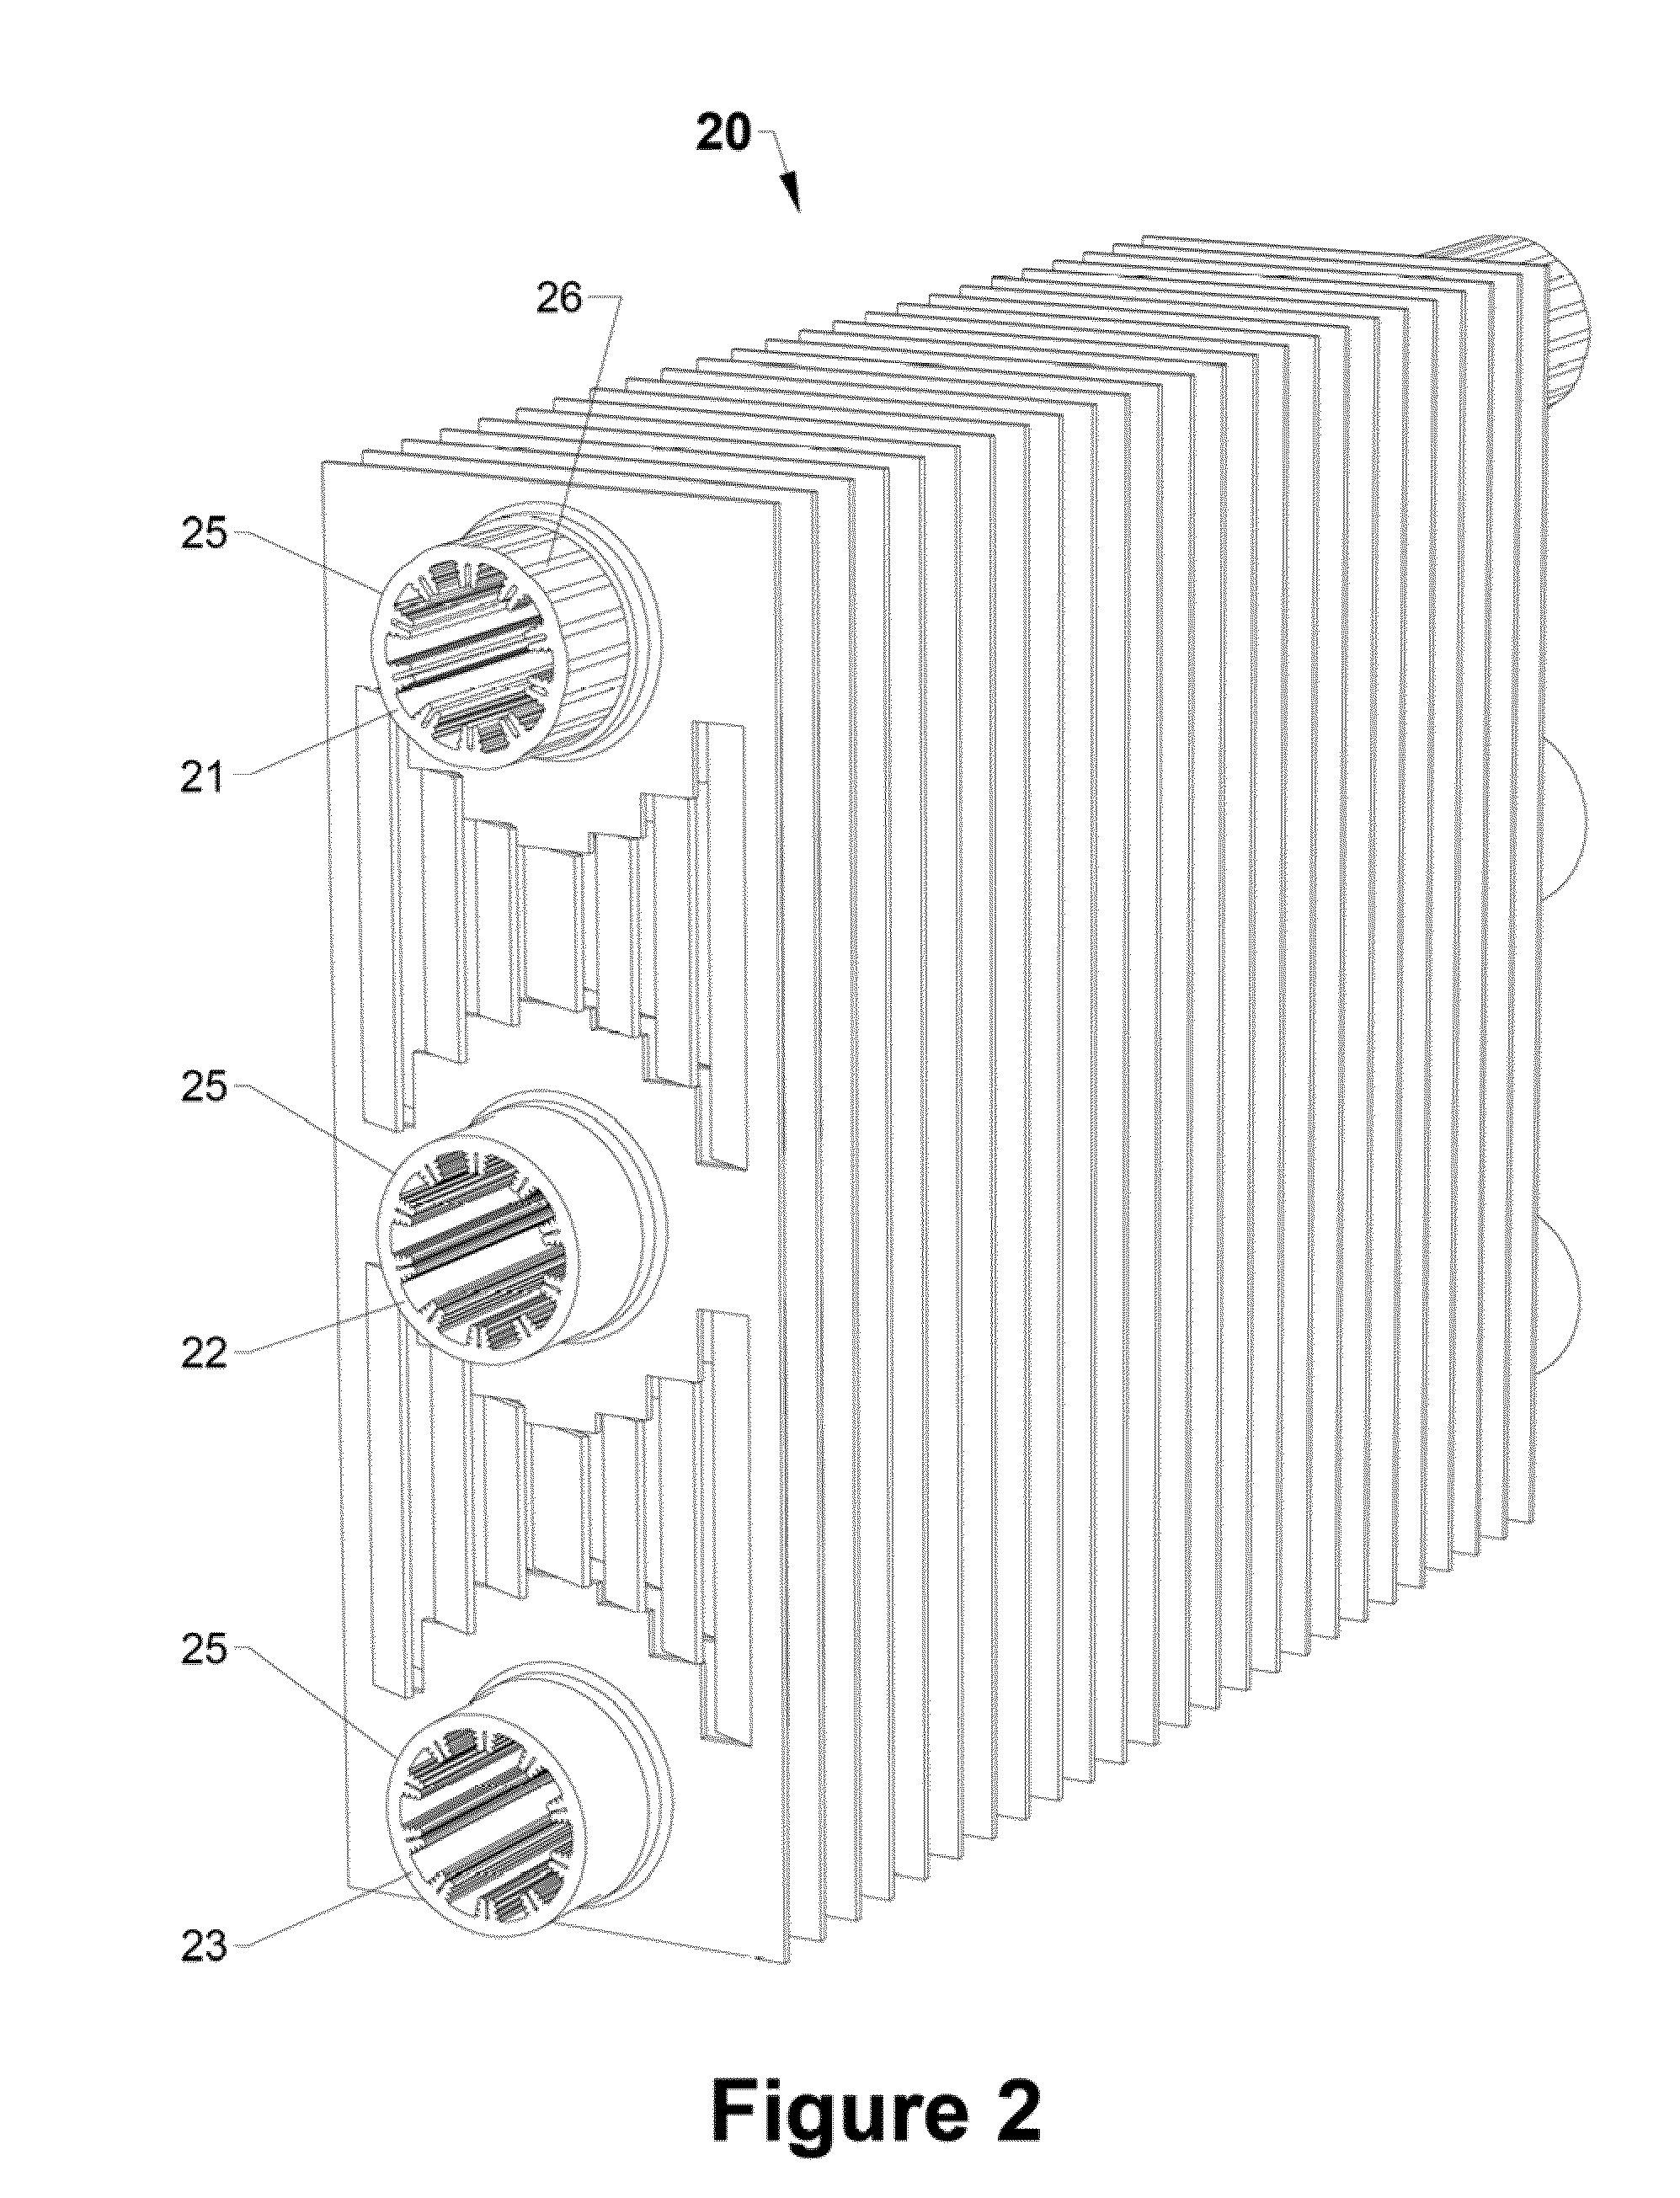 Internally finned tube having enhanced nucleation centers, heat exchangers, and methods of manufacture